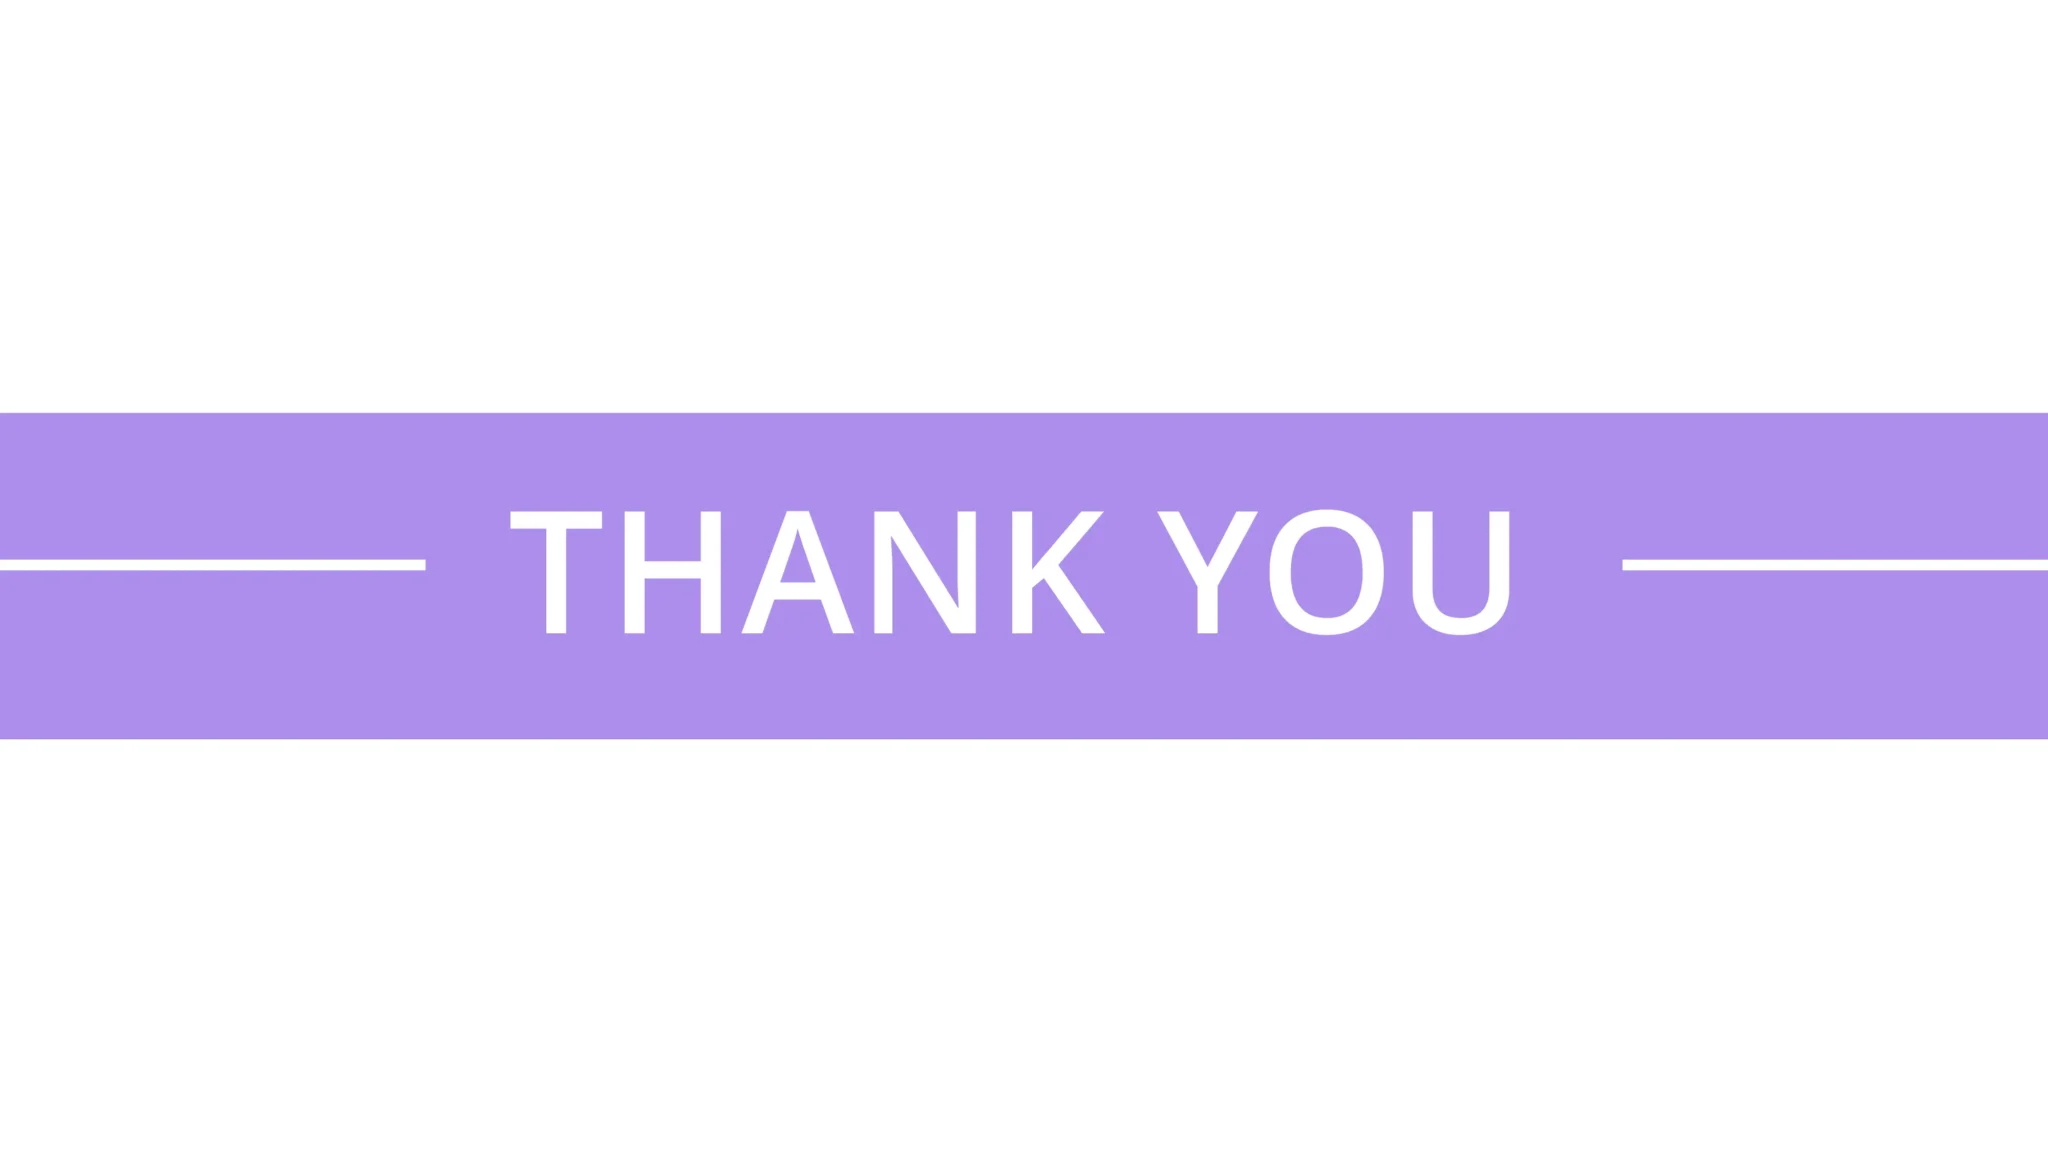 Our thank you slide has a white background with a violet design.